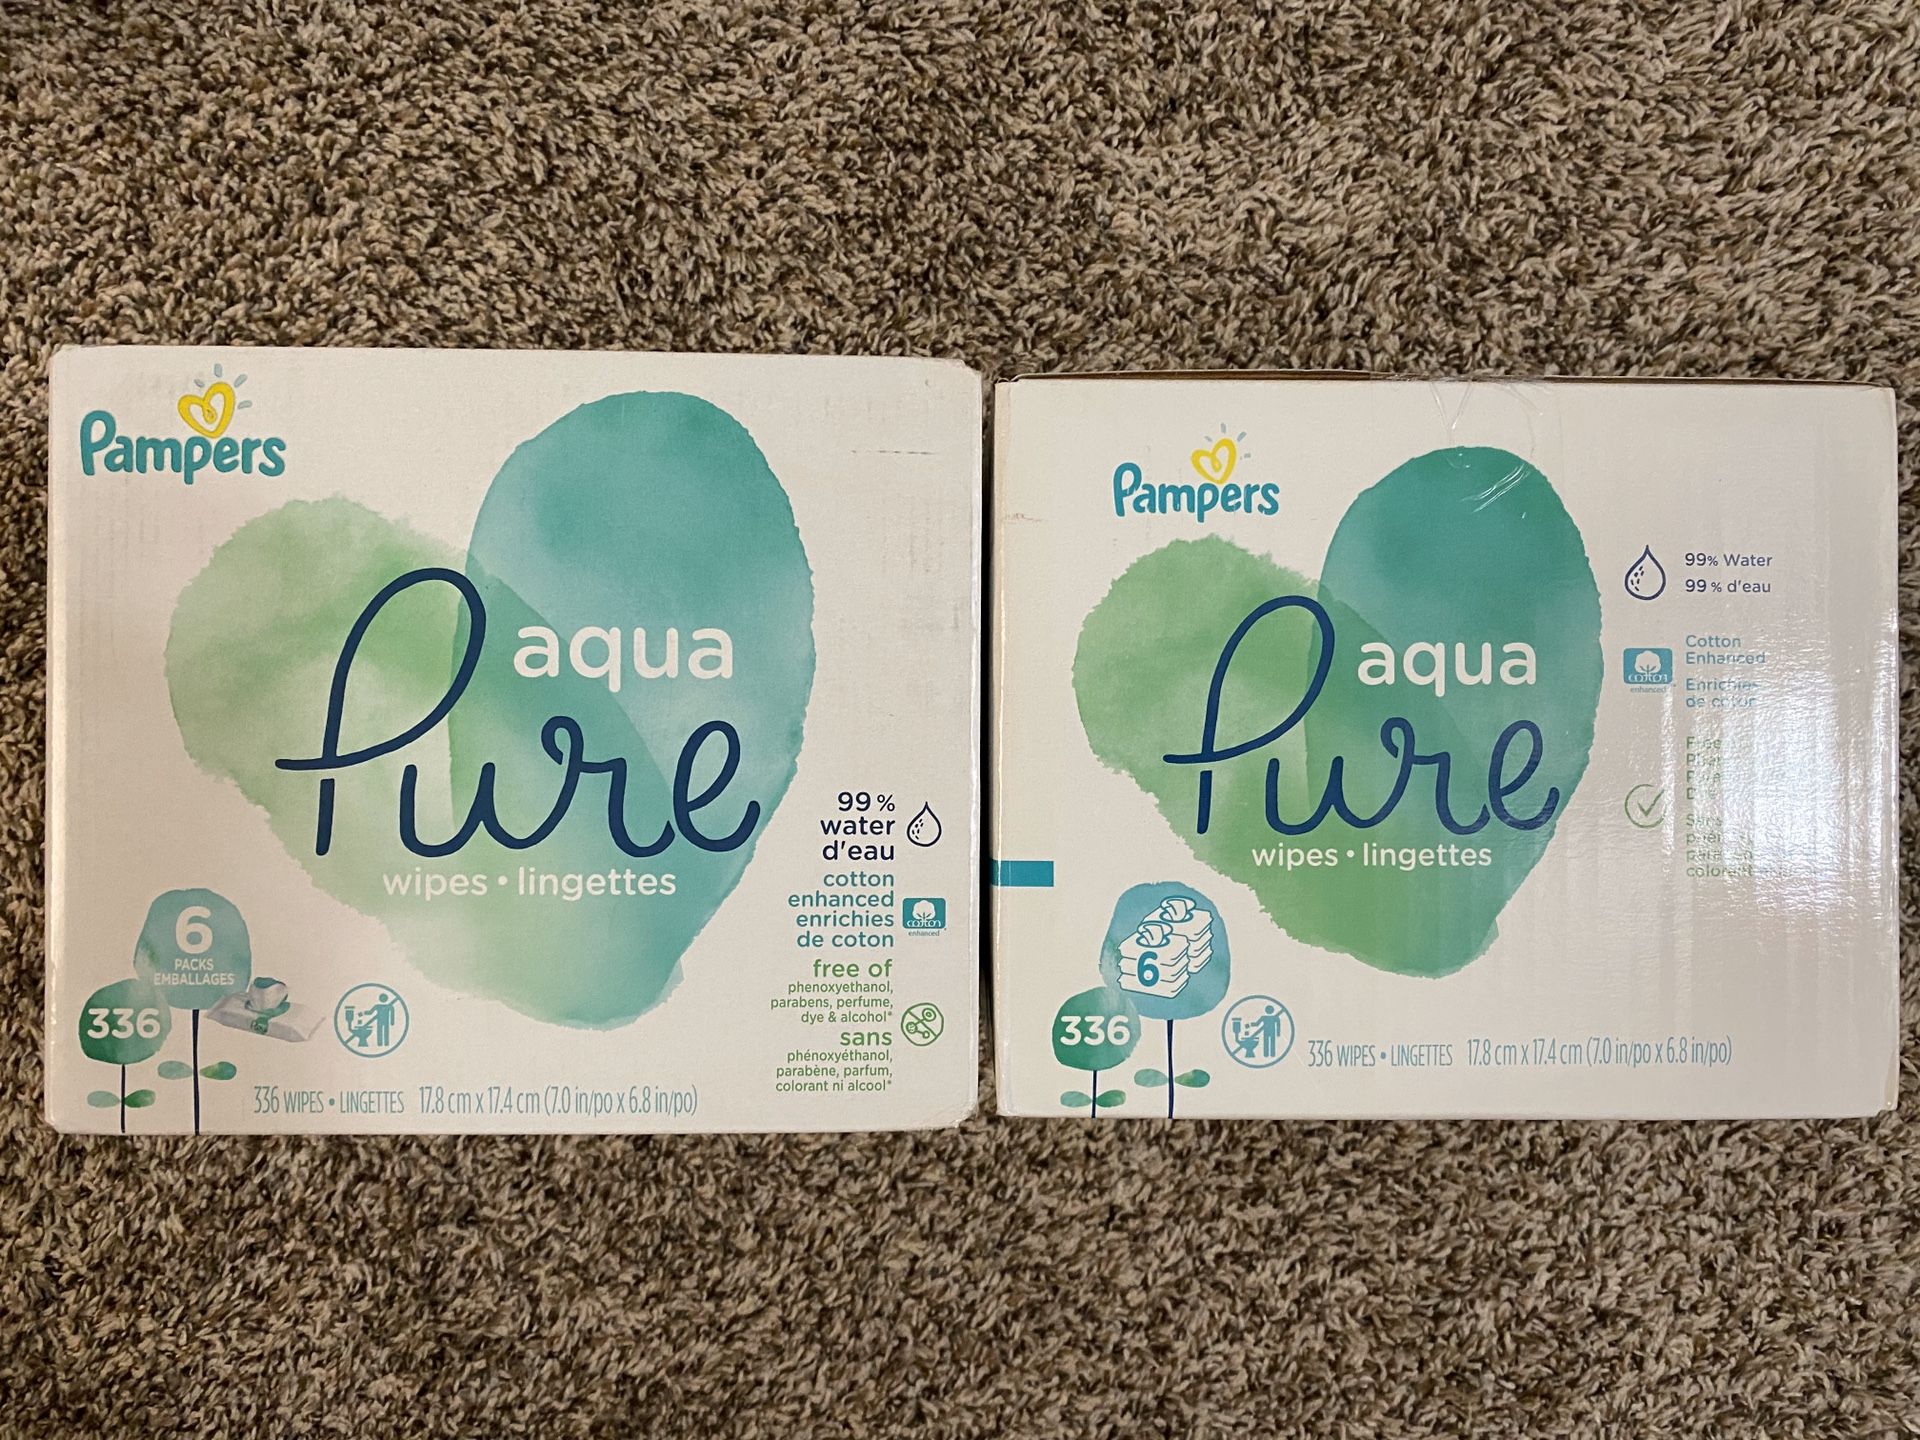 2) Pampers aqua pure 336 wipes each with free enfamil